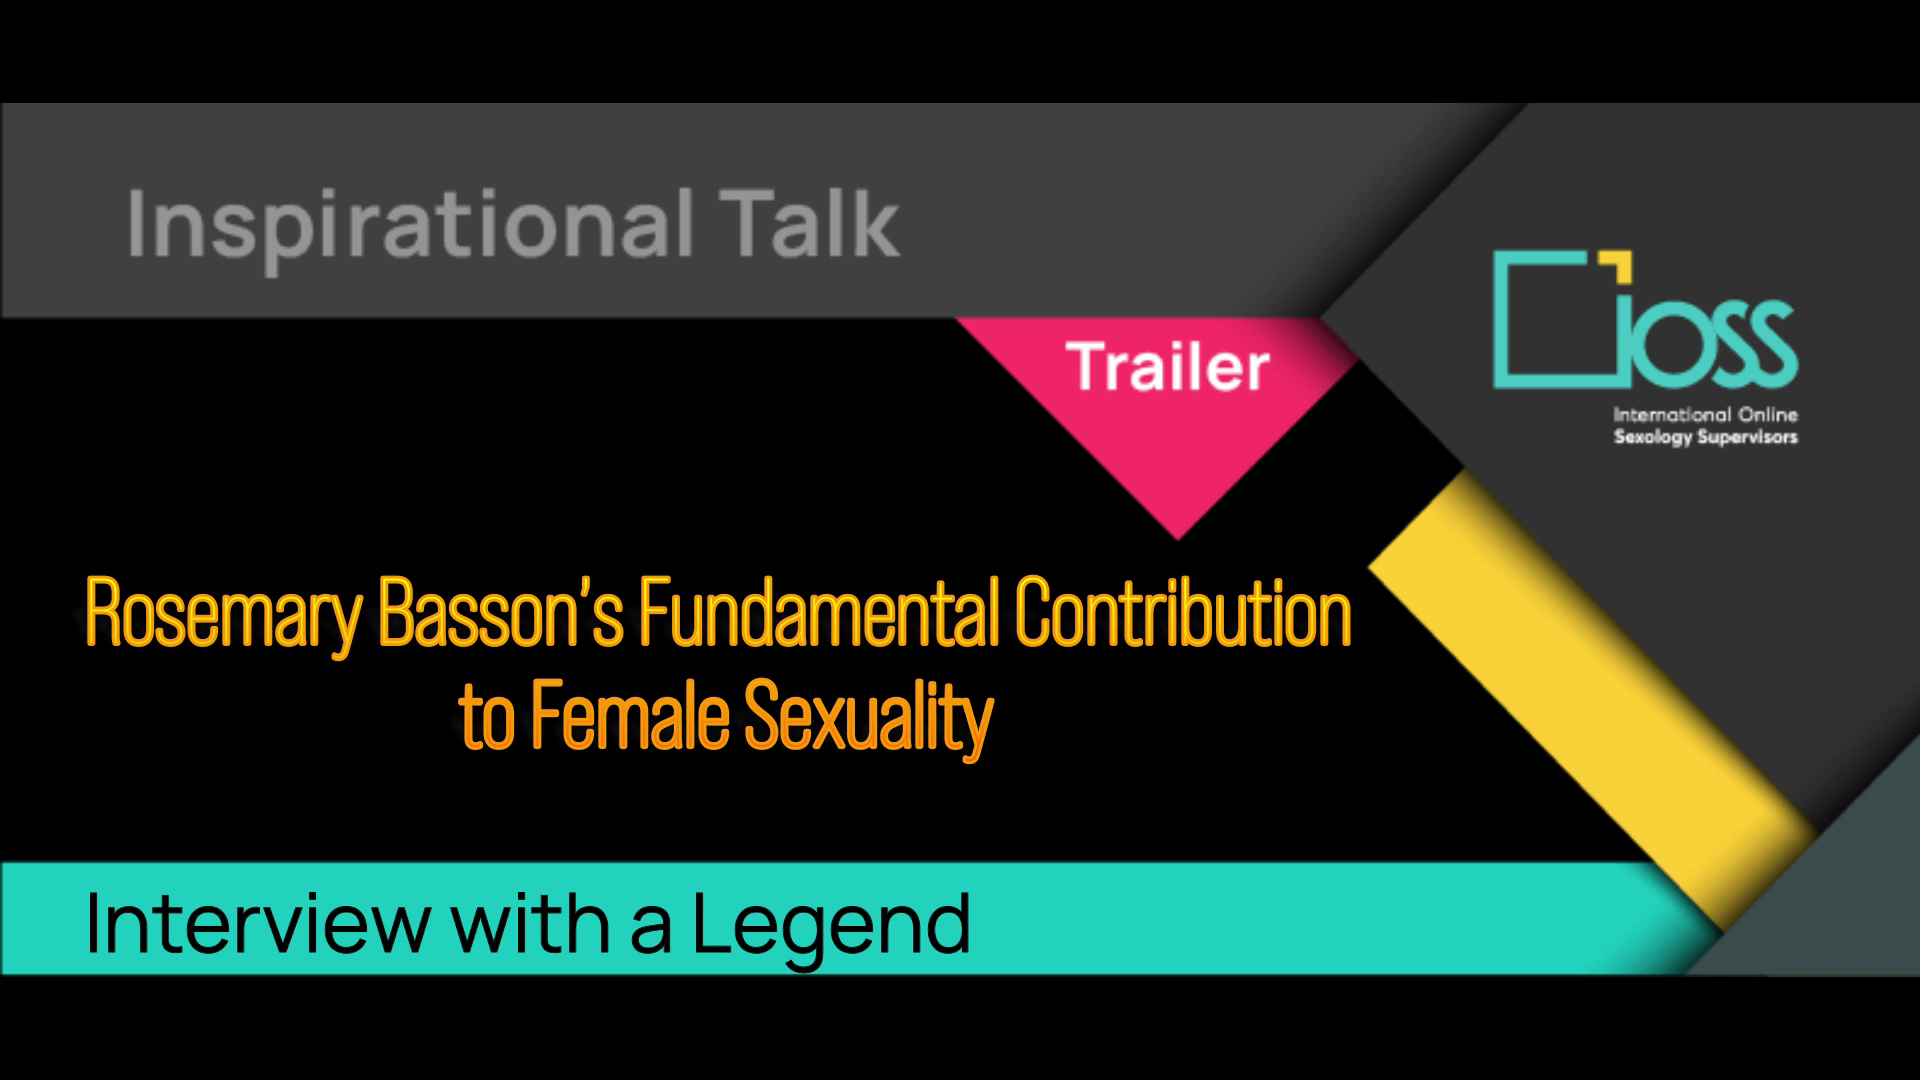 Trailer Rosemary Basson’s Fundamental Contribution to Female Sexuality (Part 1 & 2)